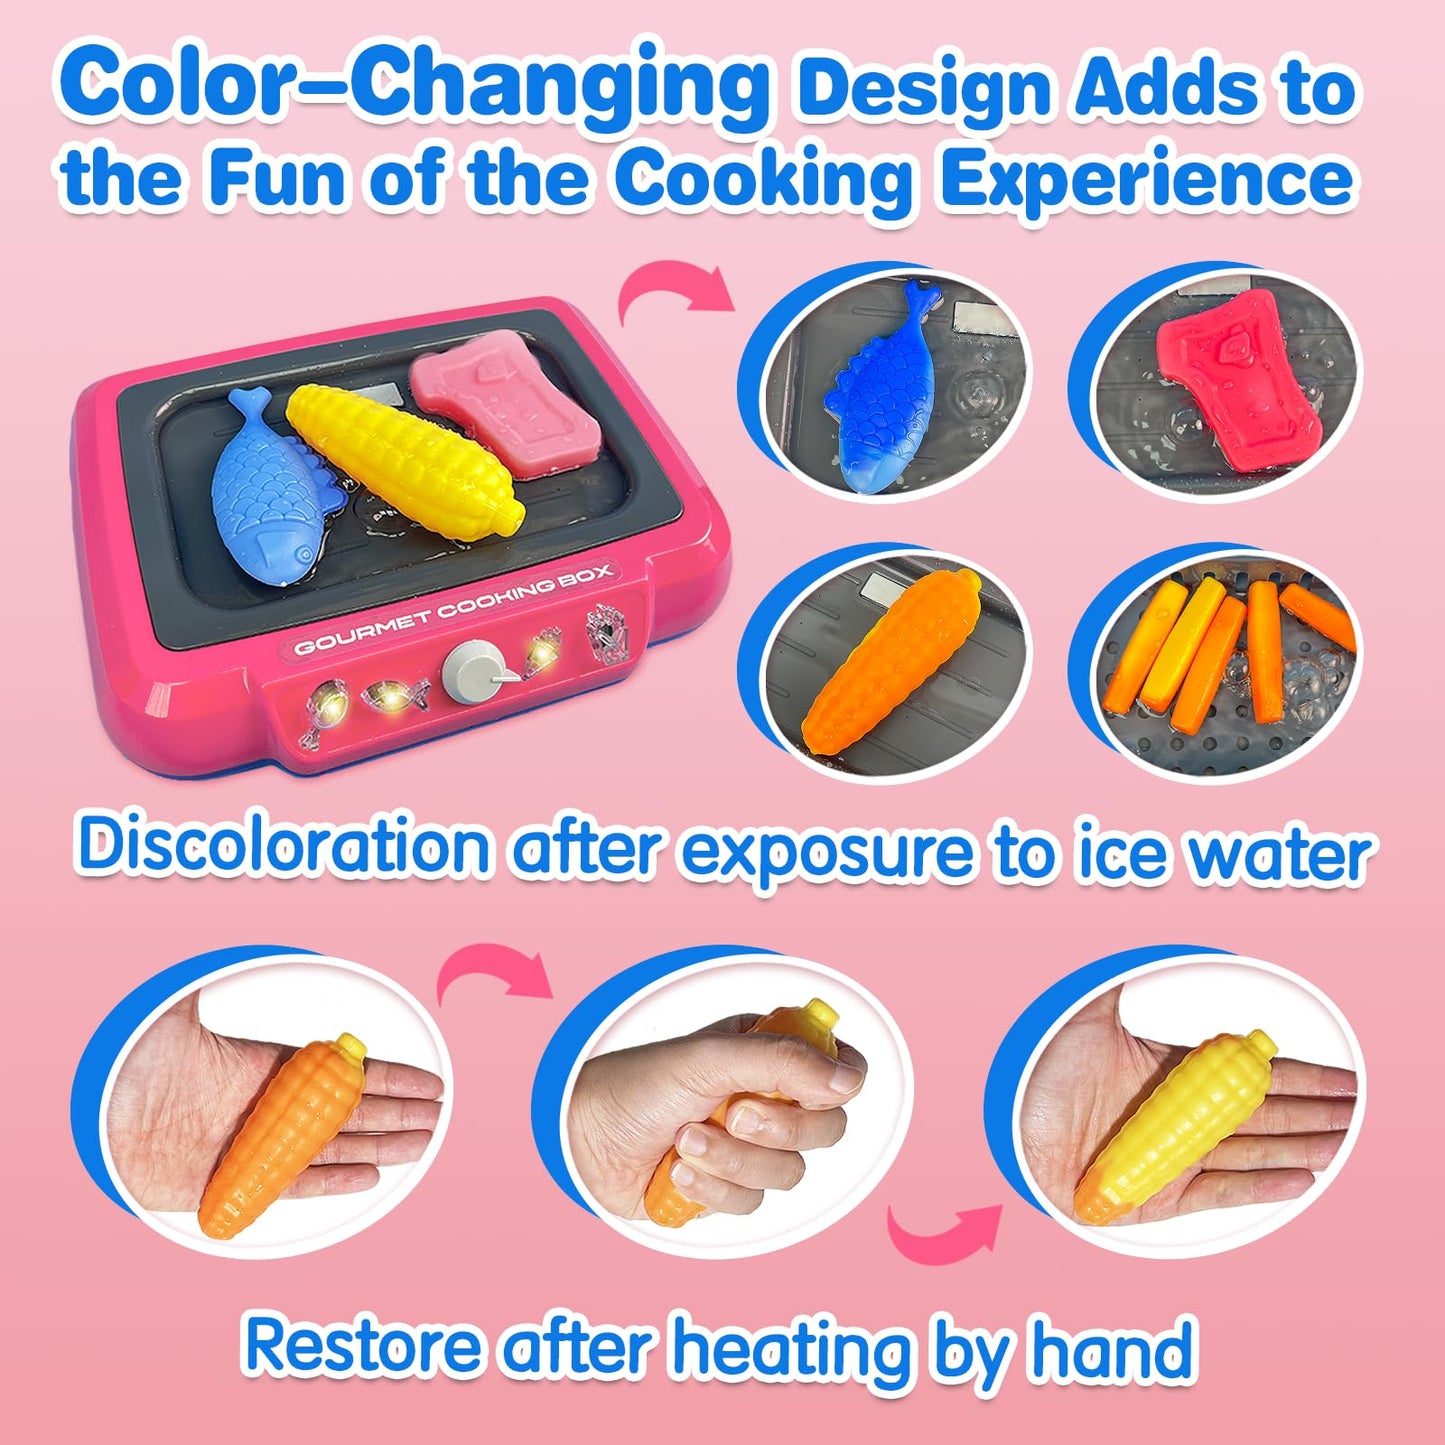 TALGIC Magic Fry Cooking Simulator: Color-Changing 20-Piece Set with Sound, Light & Bubble Grill - Pink